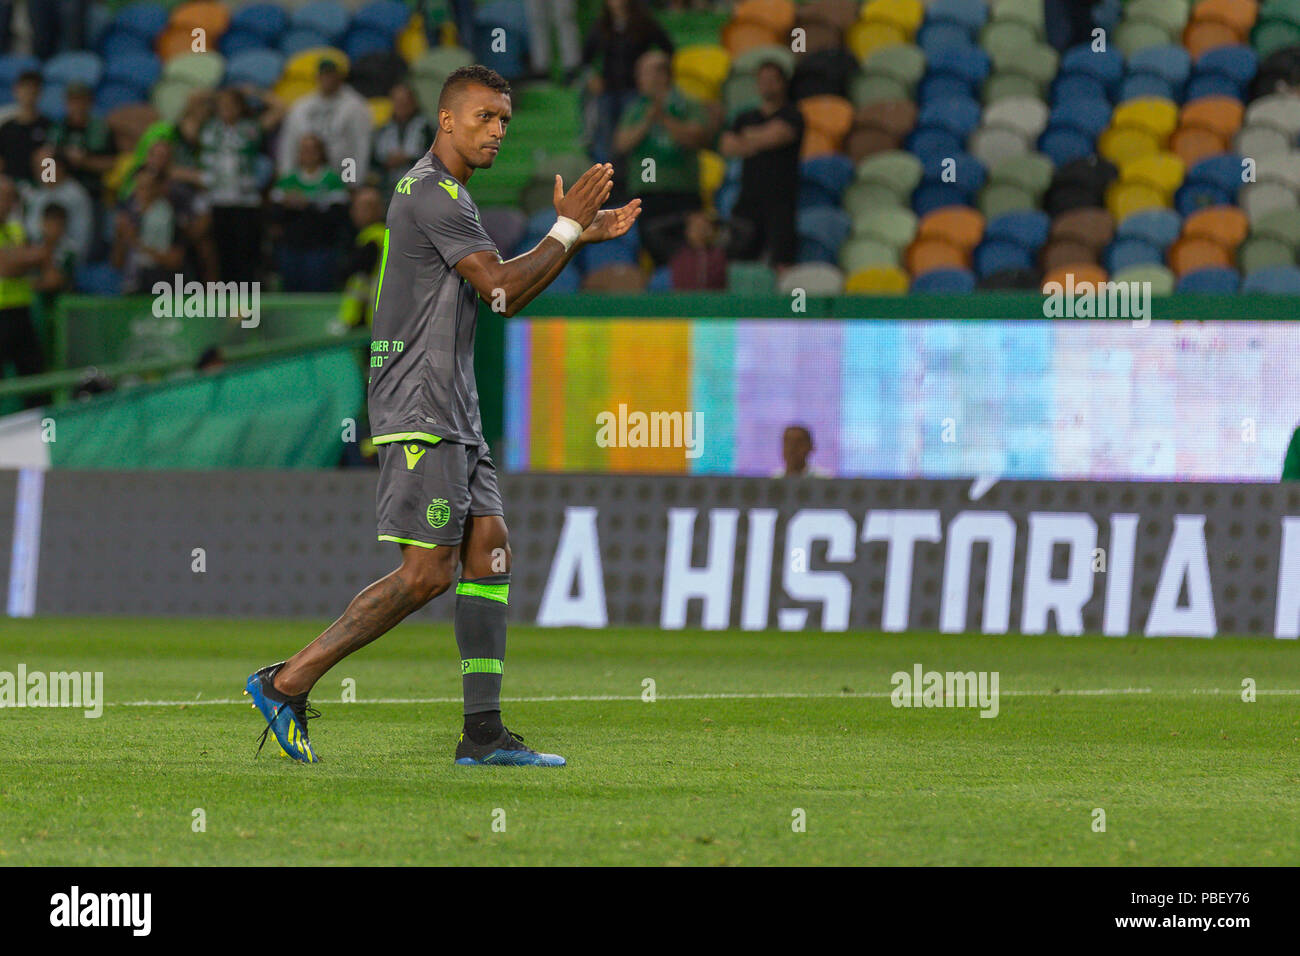 July 28, 2018. Lisbon, Portugal. Sporting's forward from Portugal Nani (17) during the game Sporting CP v Olympique de Marseille © Alexandre de Sousa/Alamy Live News Stock Photo